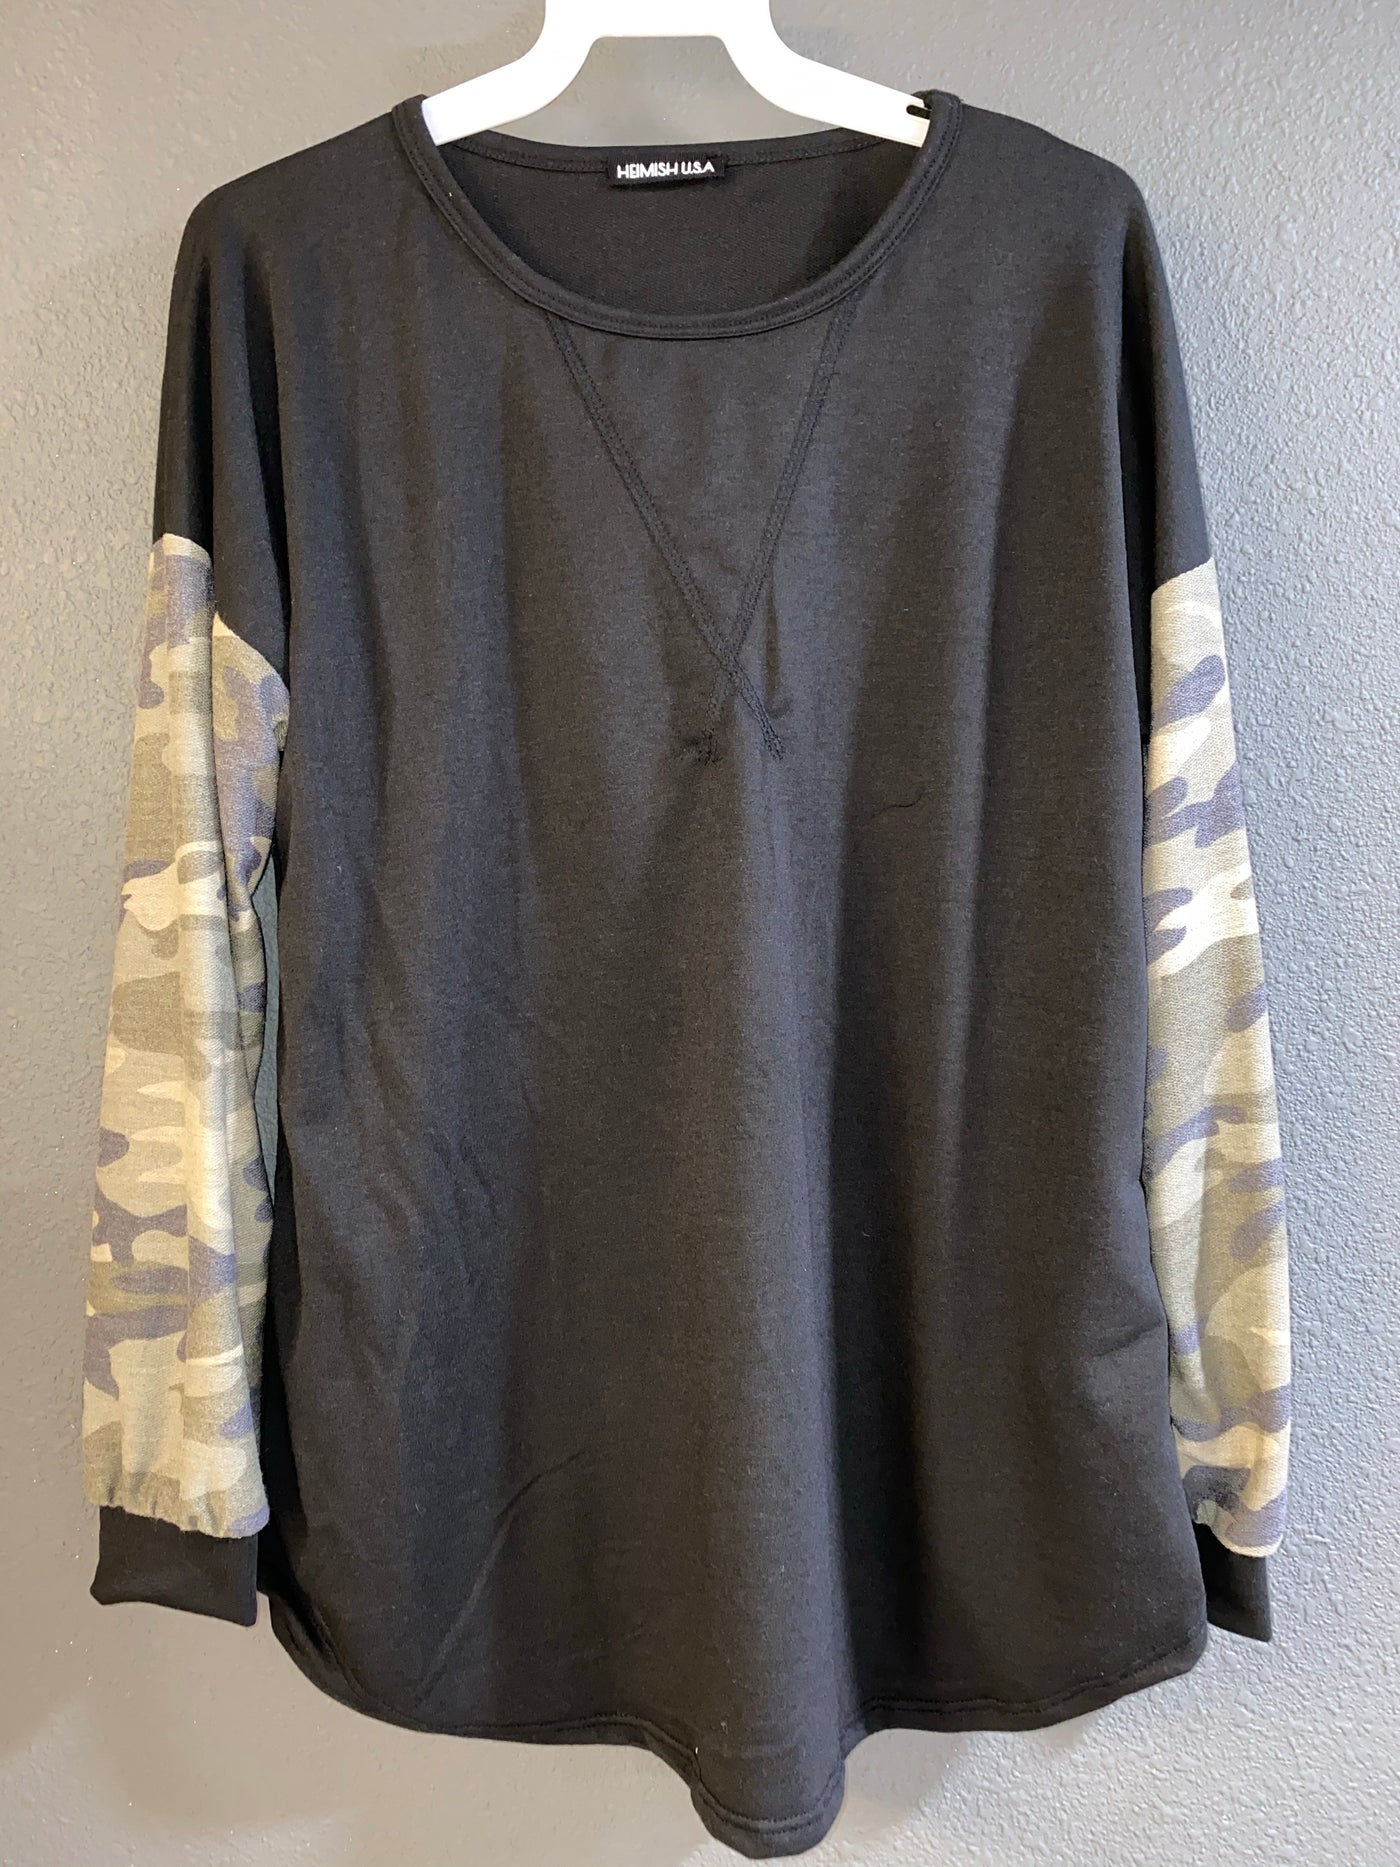 Black Top with Camo Long Sleeves